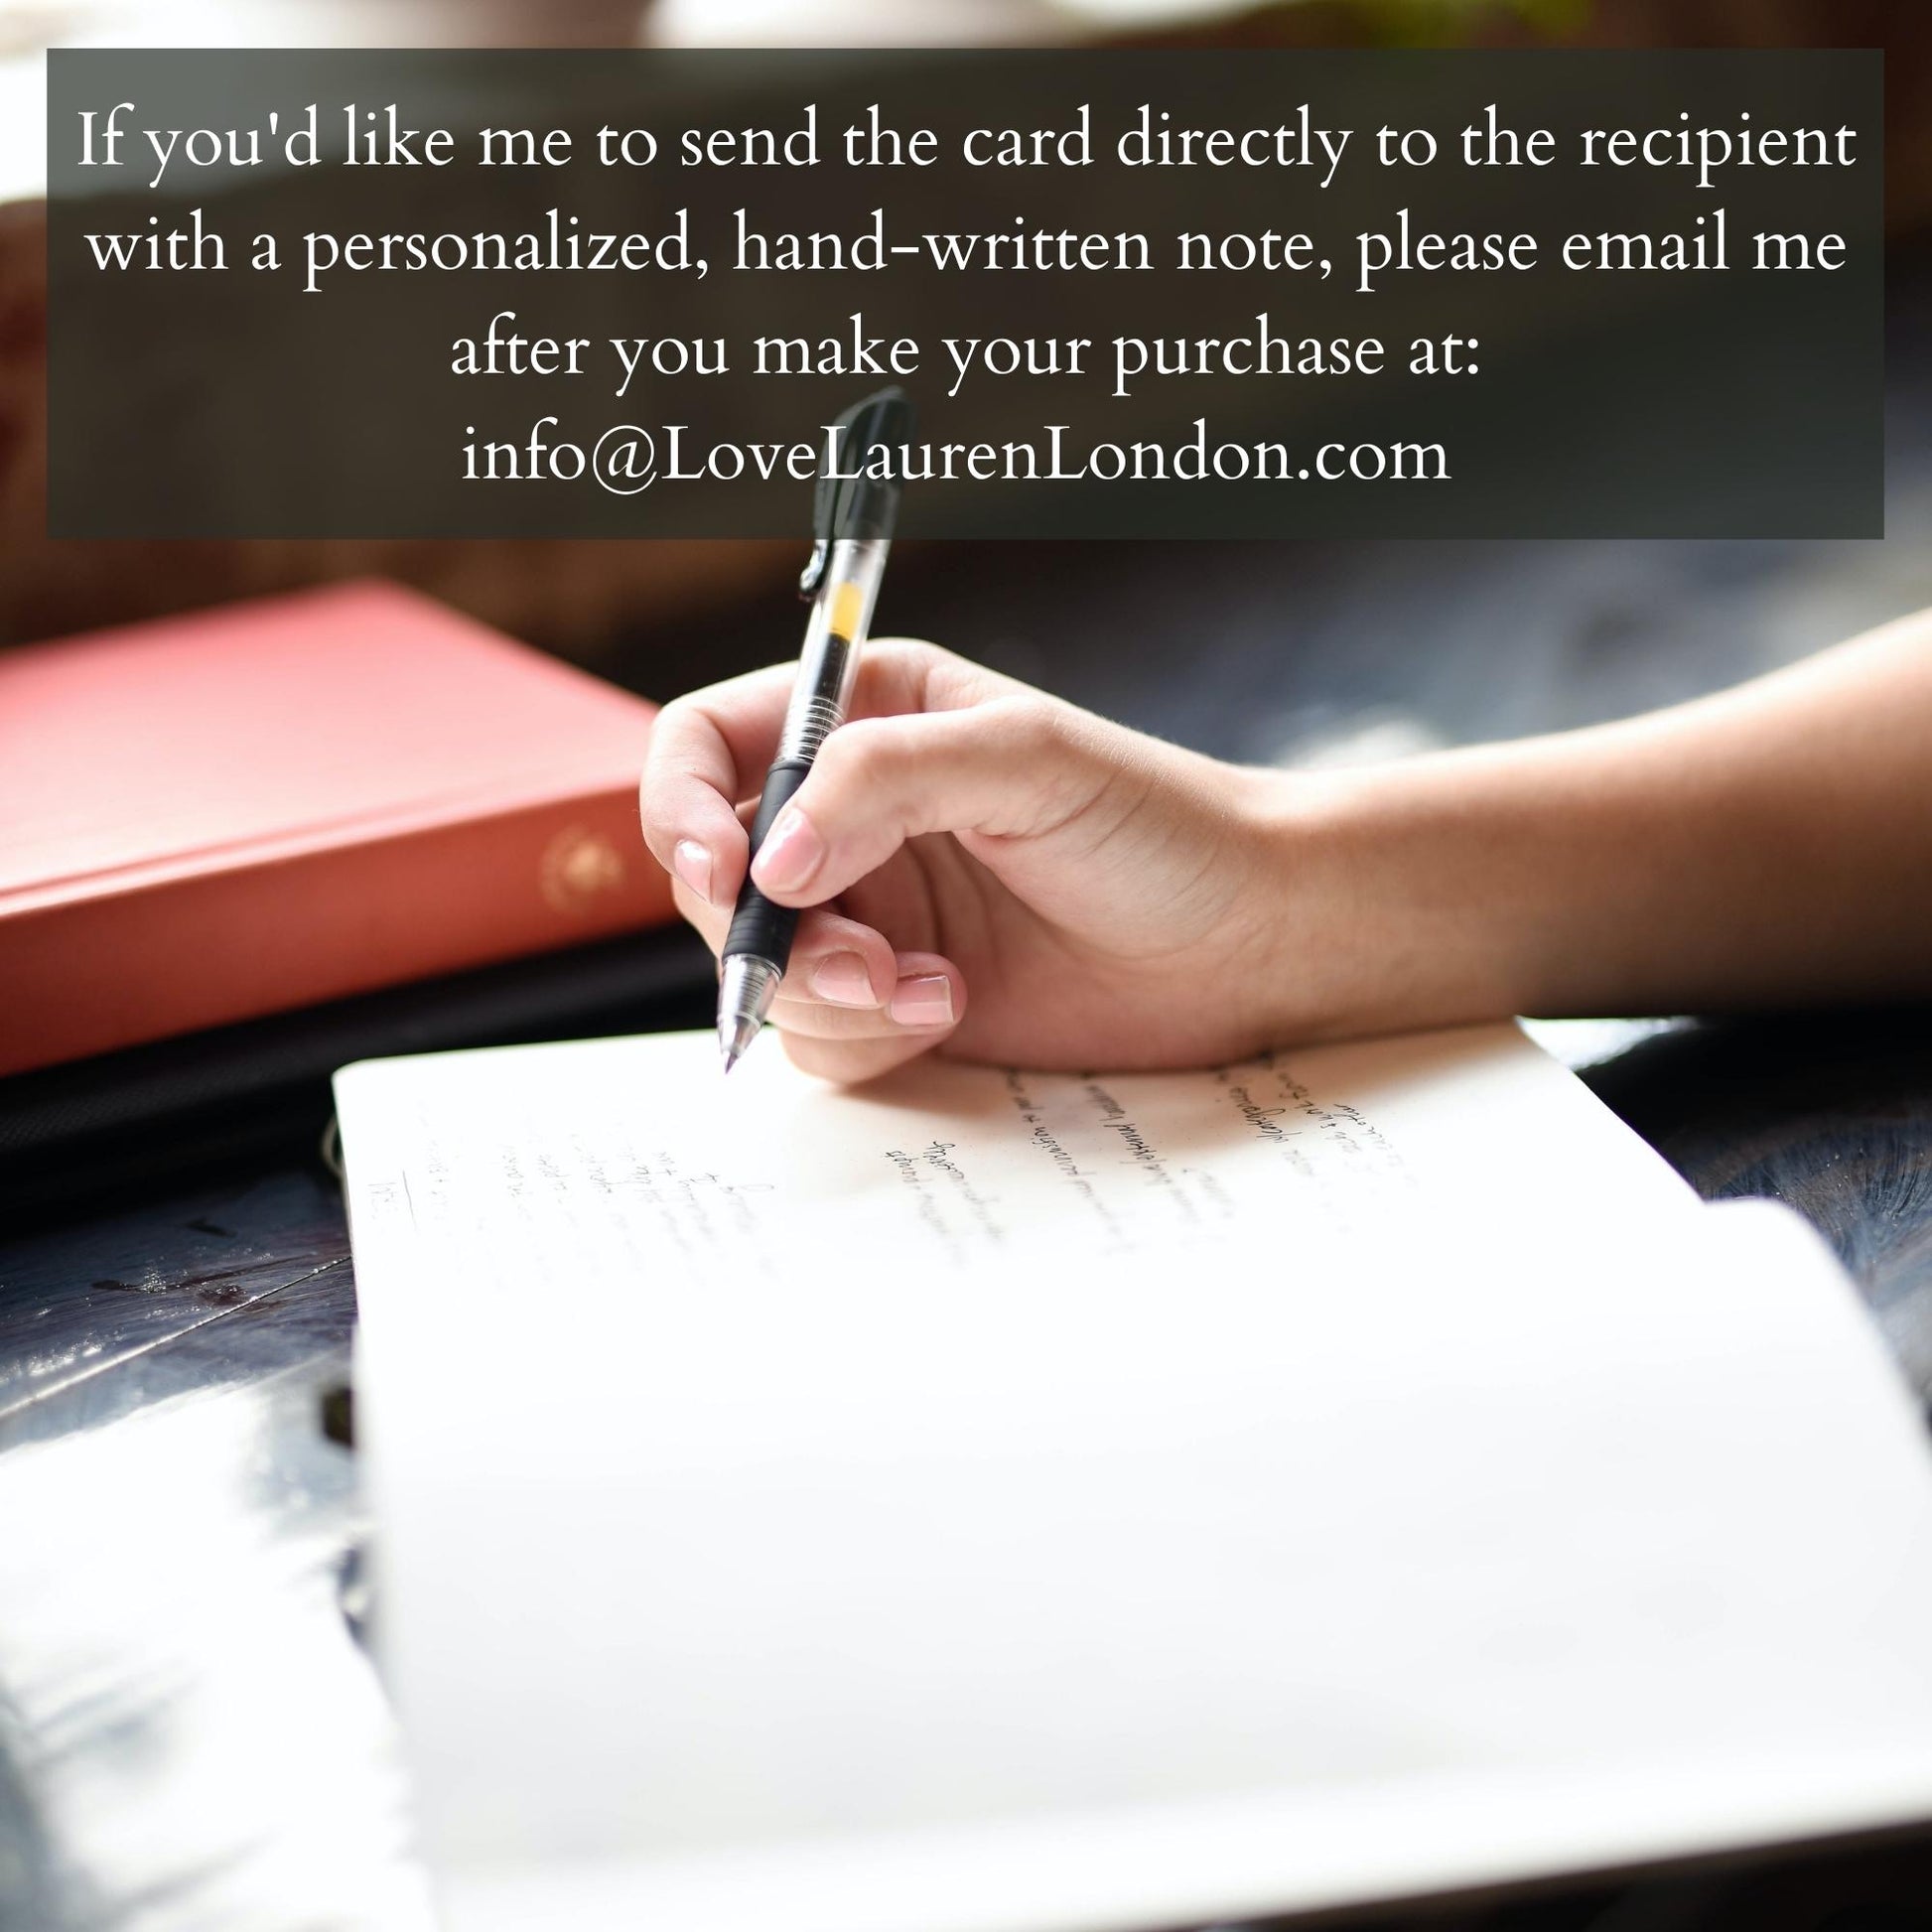 i will hand-write a note and mail it directly to the recipient, at no additional fee